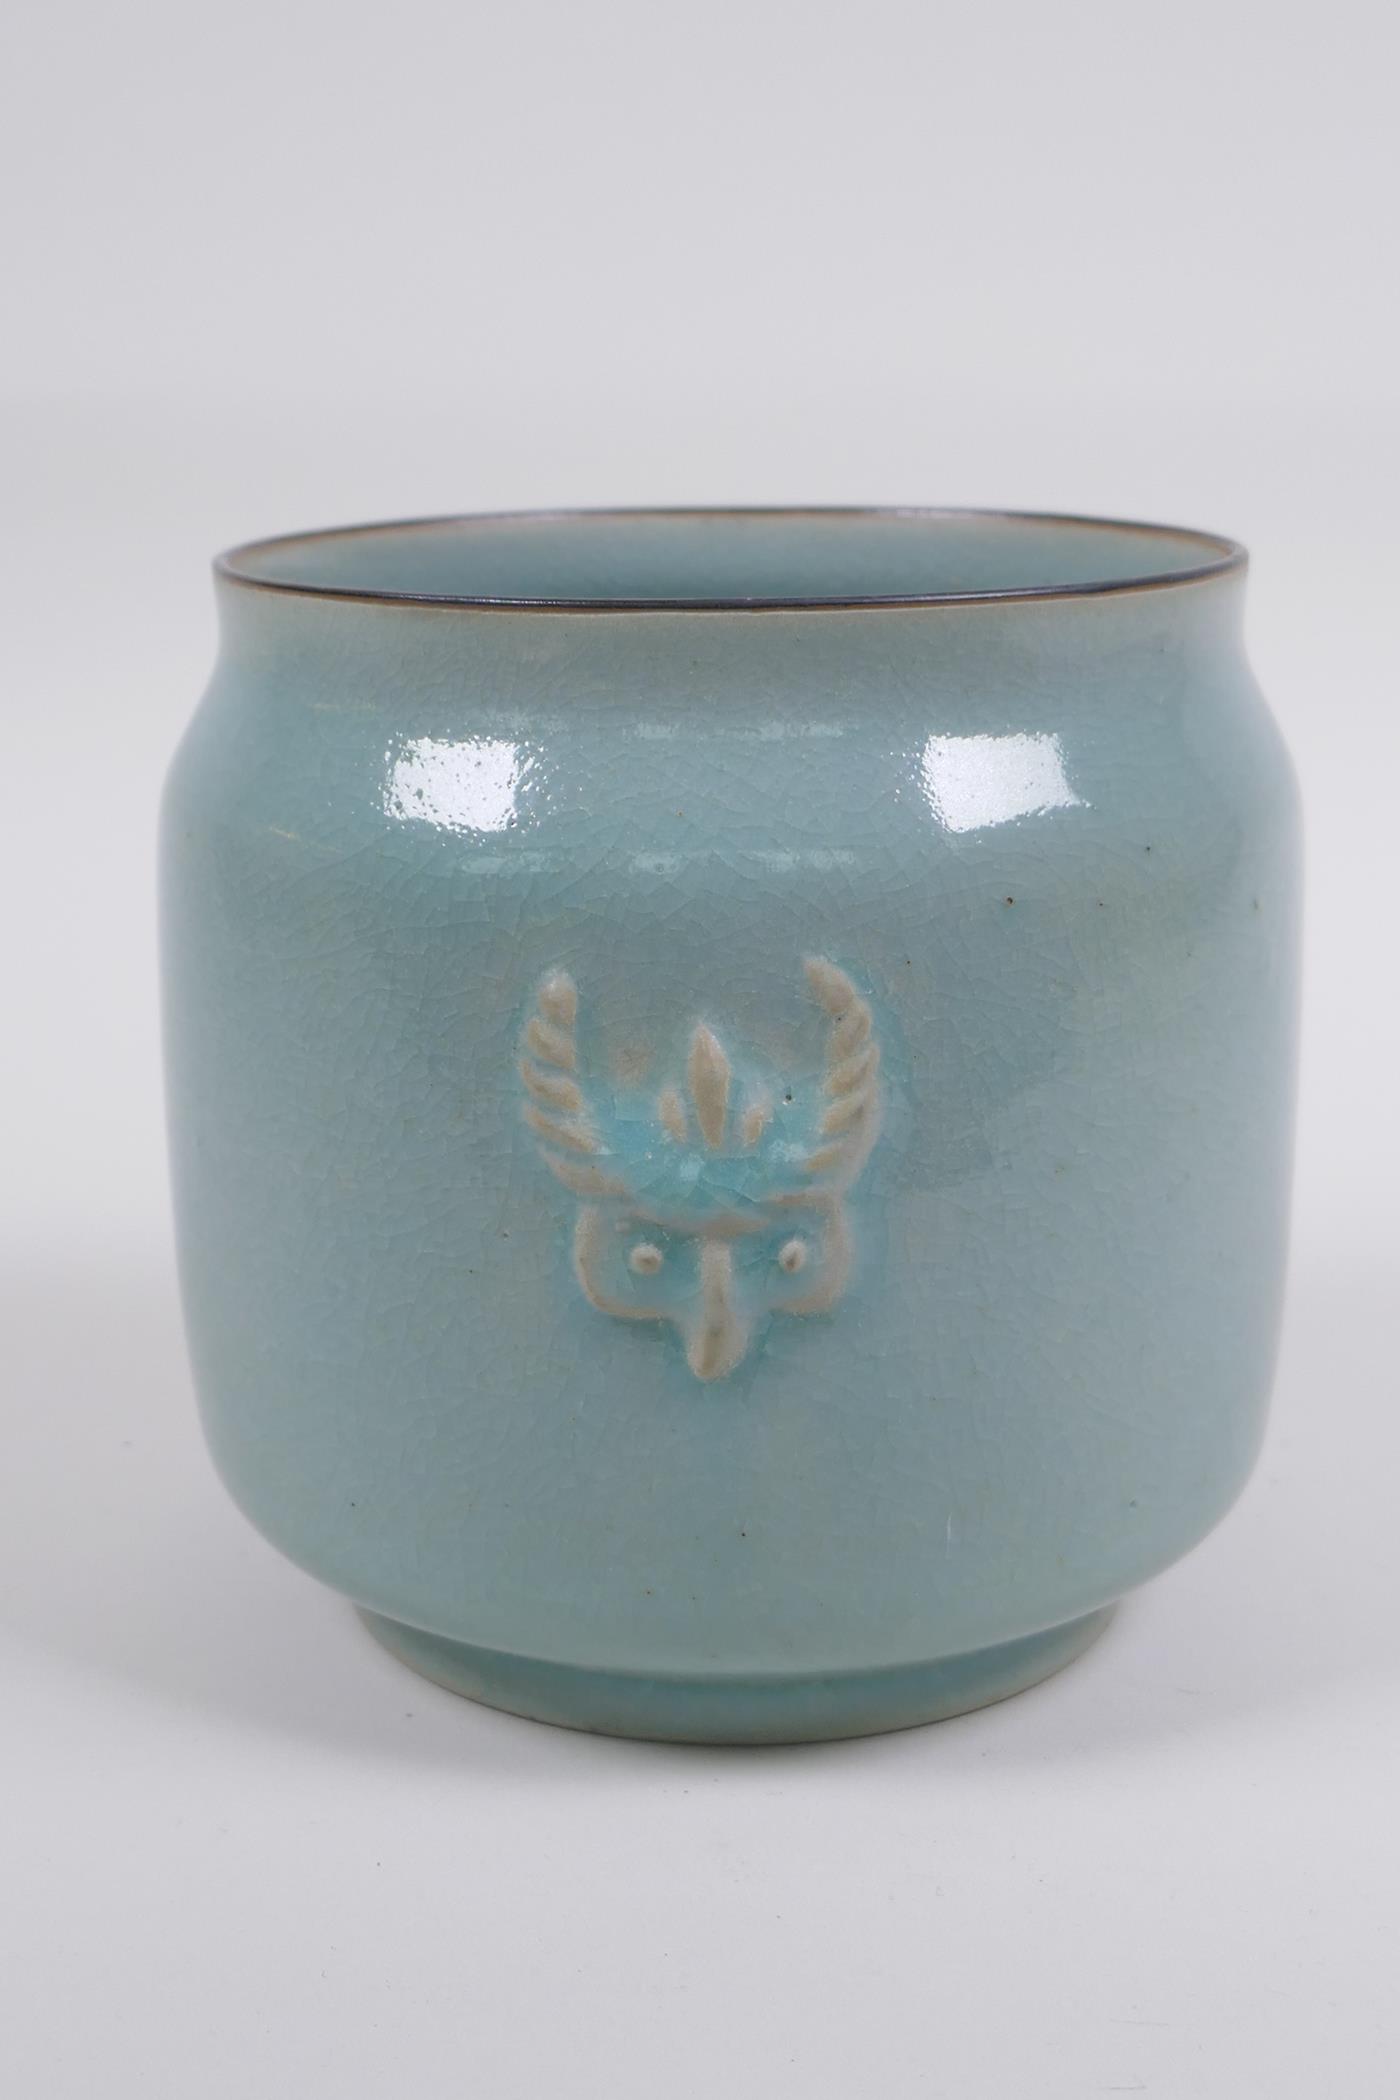 Chinese Ru ware style celadon glazed jar with twin mask decoration, 12cm high x 12cm diameter - Image 3 of 5